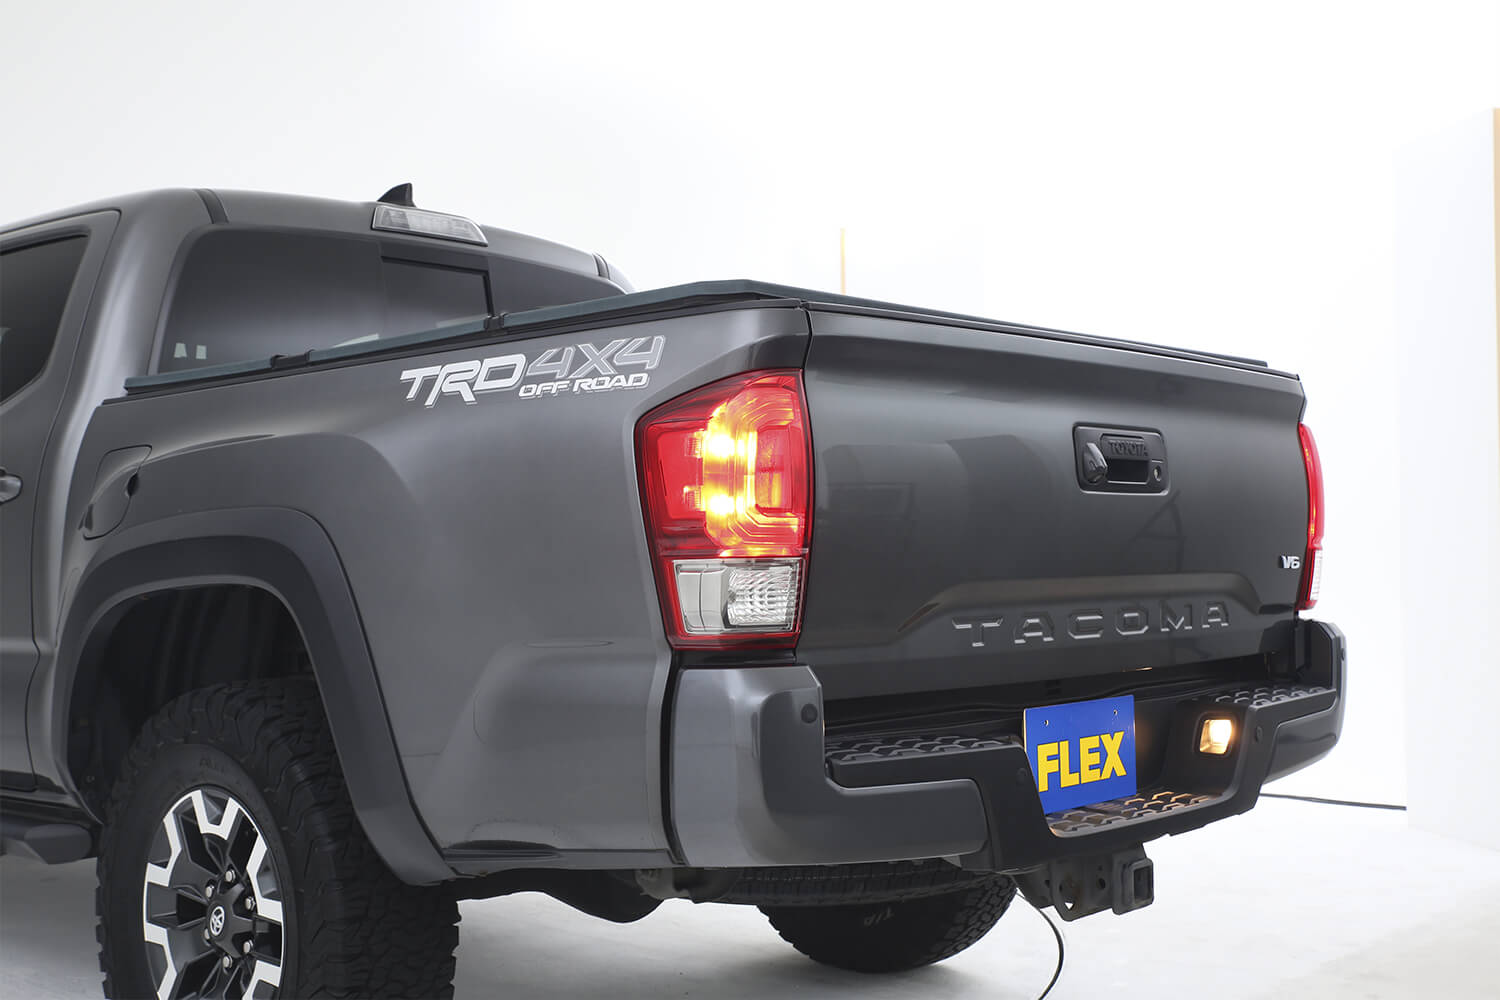 Towing capacity of the latest model Toyota Tacoma